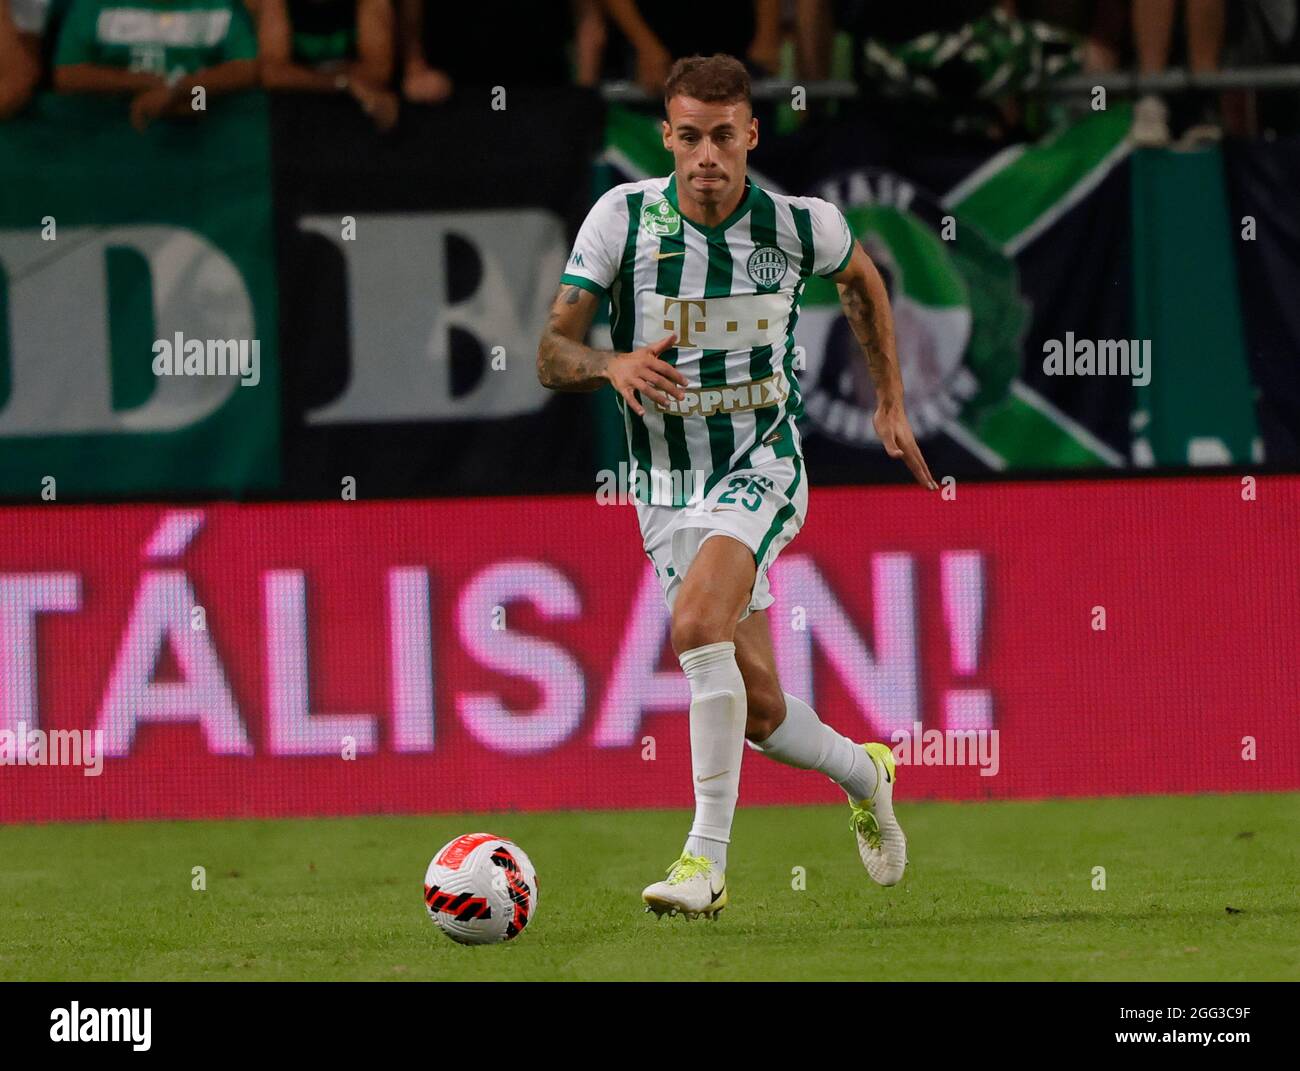 BUDAPEST, HUNGARY - AUGUST 4: Stjepan Loncar of Ferencvarosi TC controls  the ball during the UEFA Champions League Third Qualifying Round 1st Leg  match between Ferencvarosi TC and SK Slavia Praha at